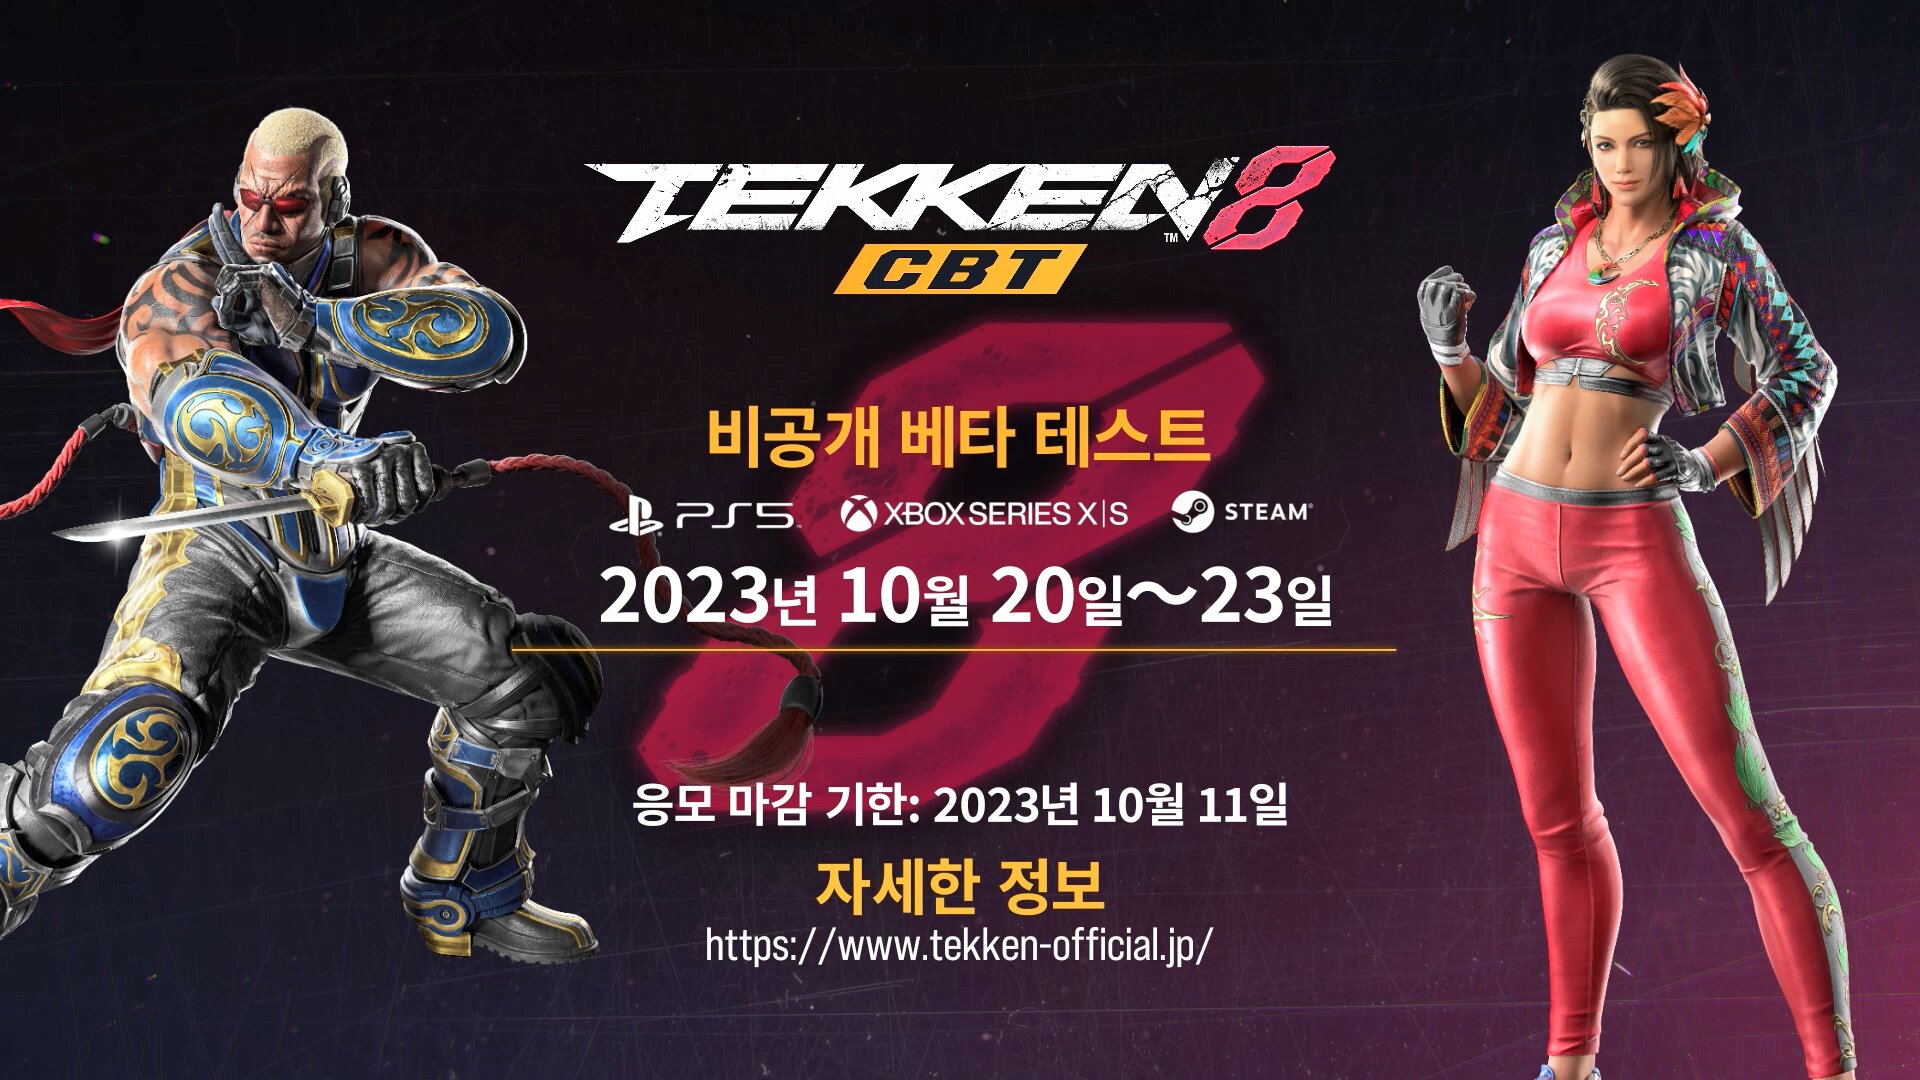 Bandai Namco Entertainment Korea Announces Closed Beta Test for ‘Tekken 8’ with New Characters and Gameplay Features